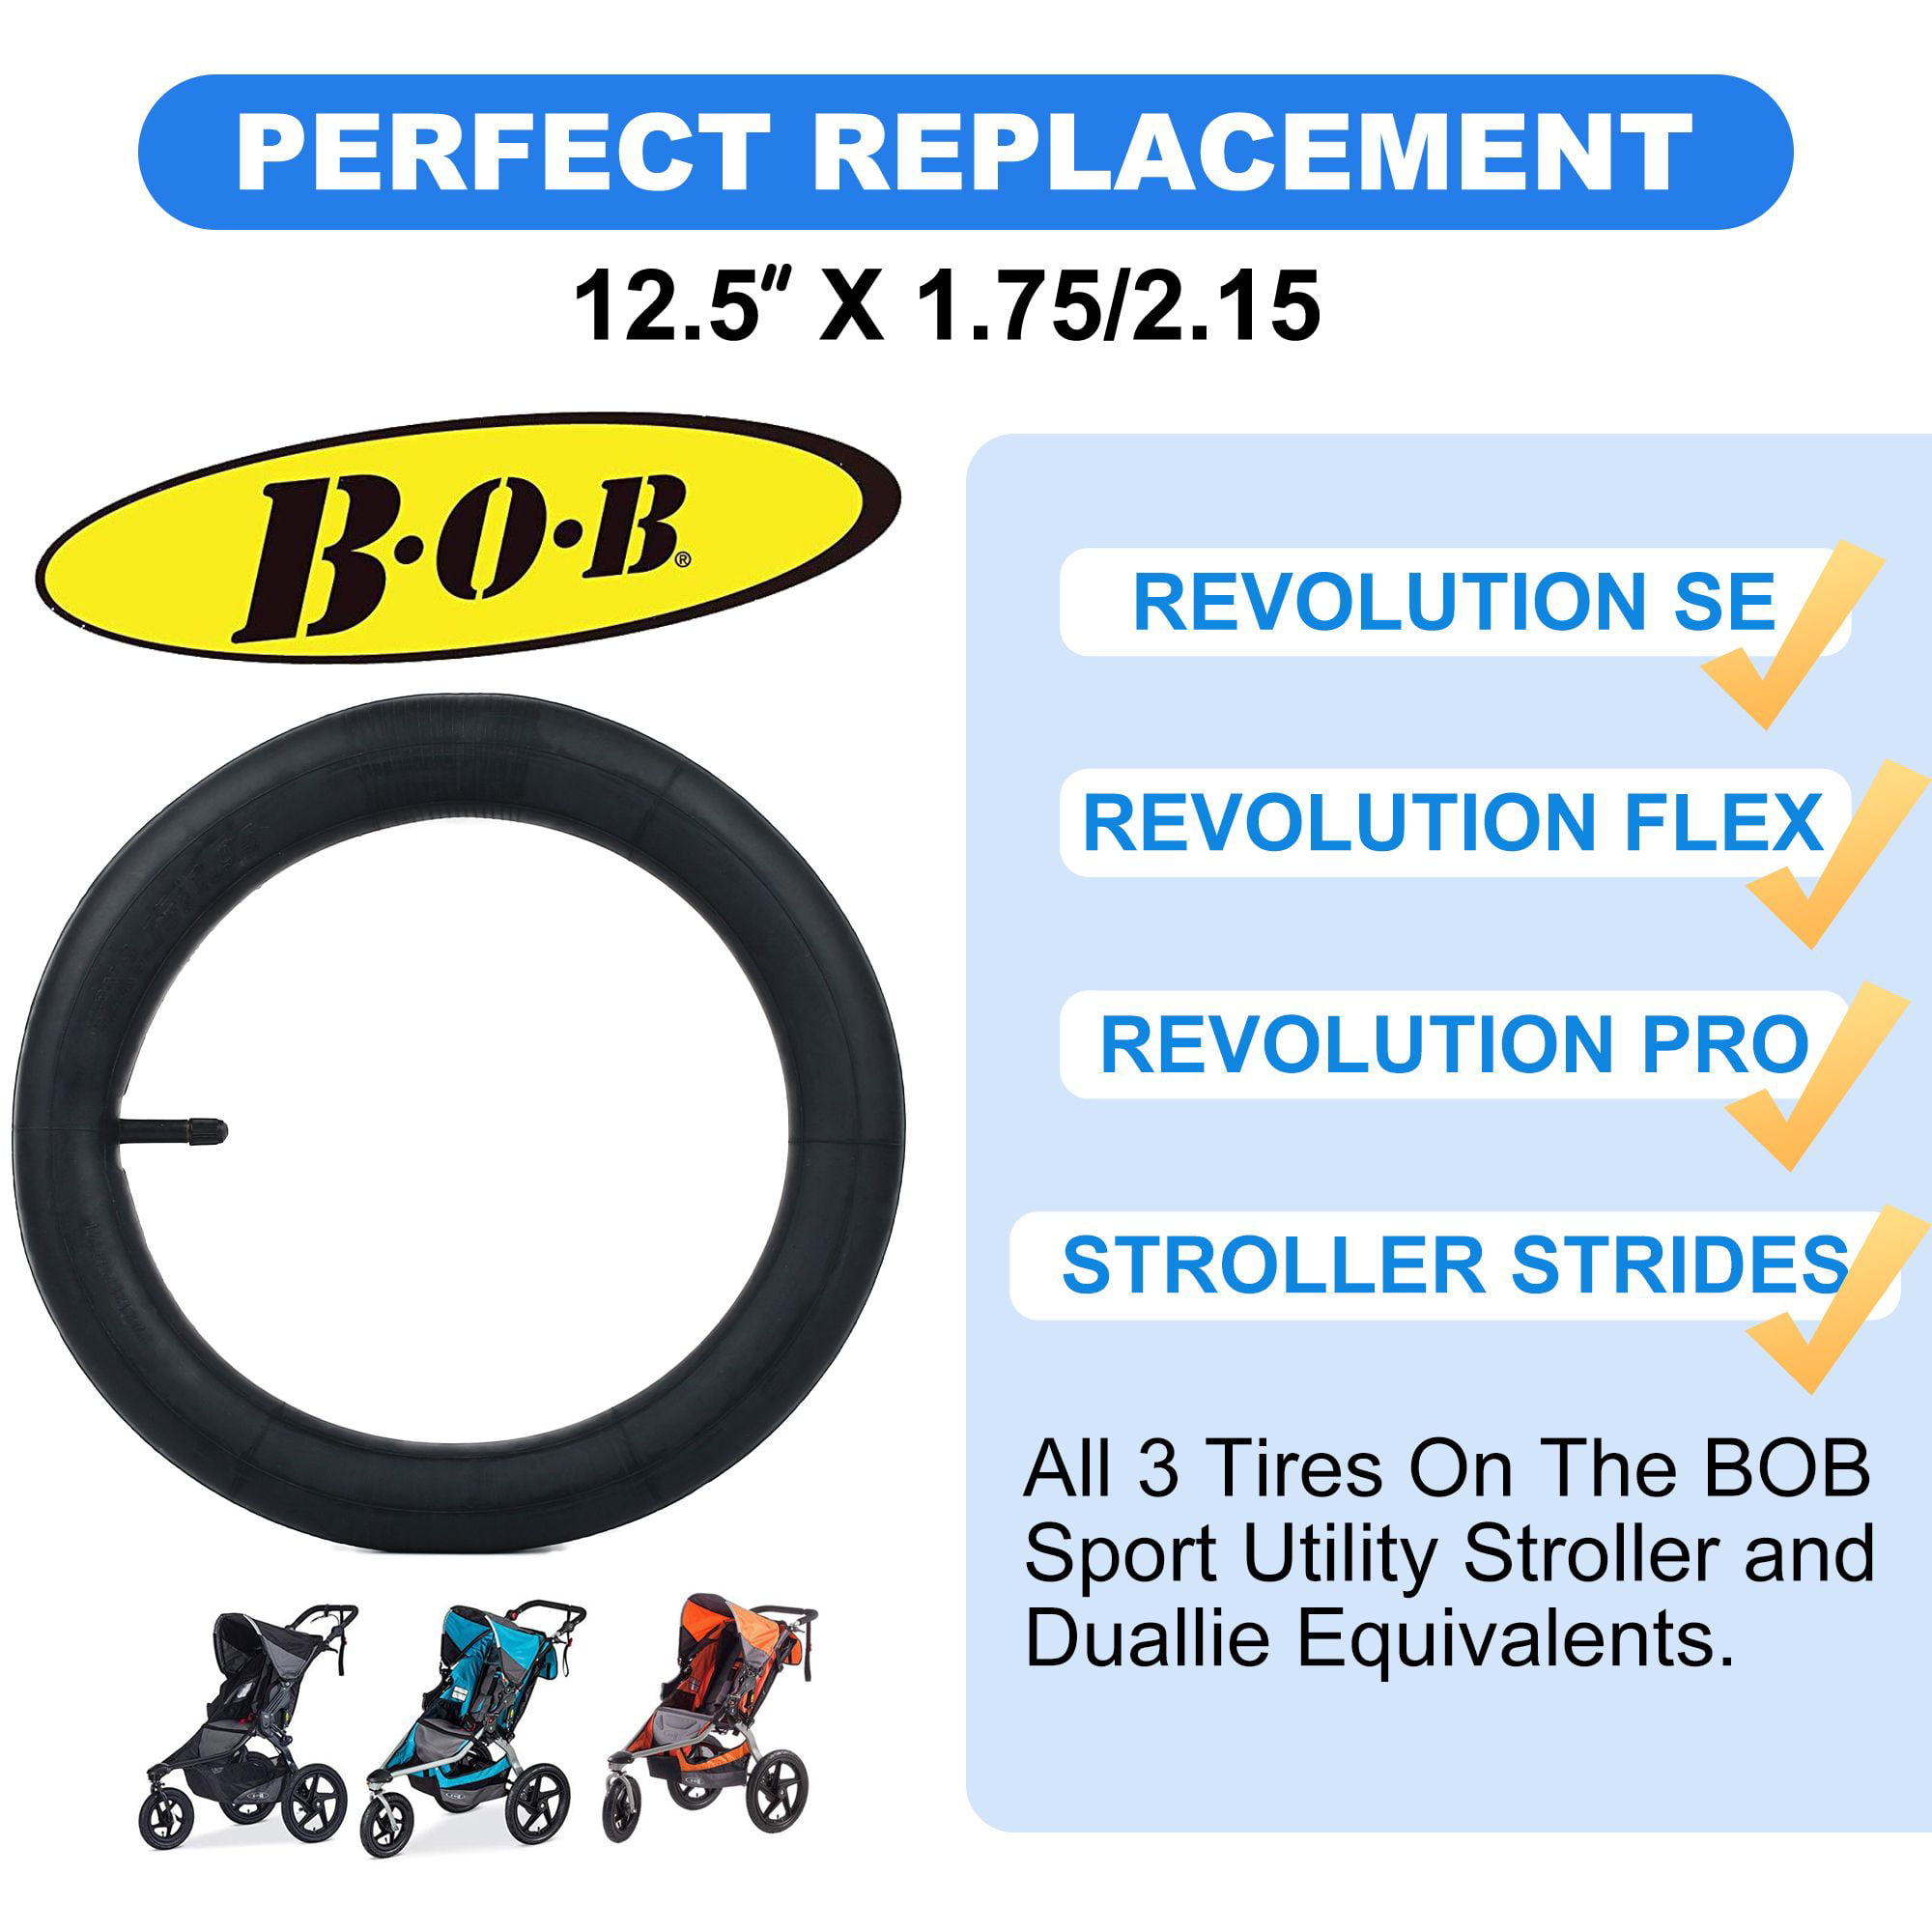 Wadoy Stroller Inner Tube 12.5 for Bob Revolution Se/Pro/Flex/Su/Ironman Jogging and Duallie Stroller Replacement Bob Front Tire Tube 12.5 x 1.75/2.15